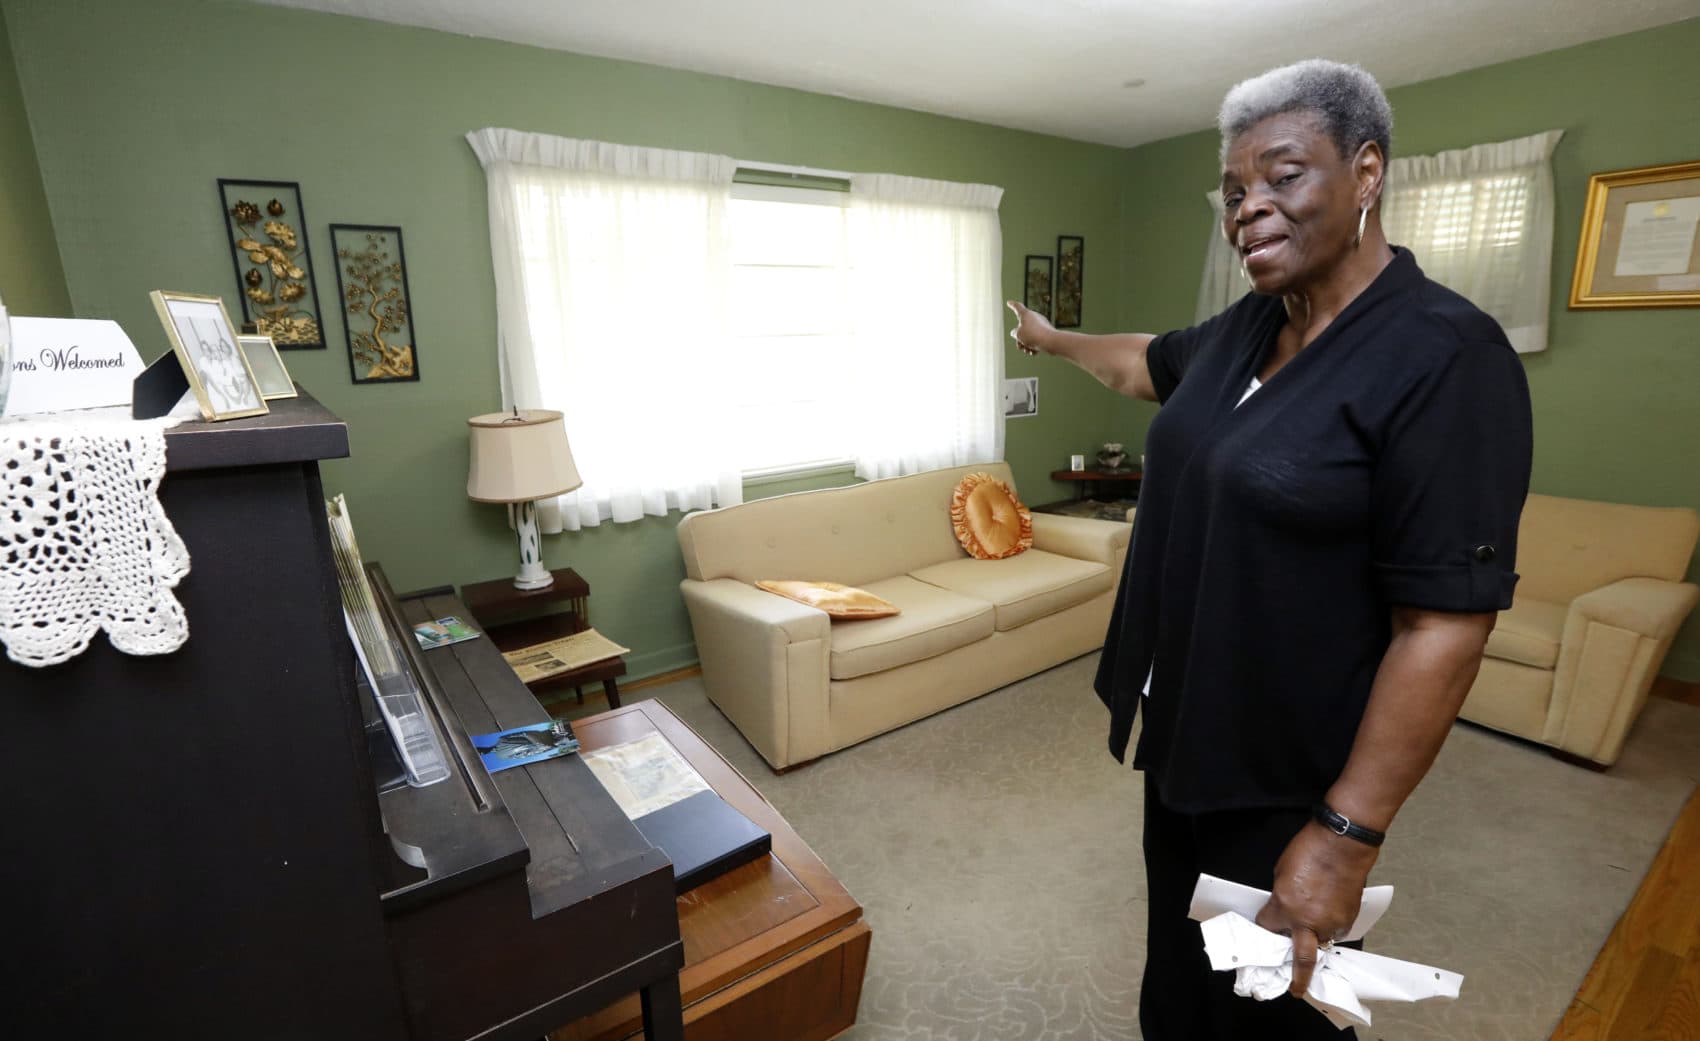 Minnie White Watson, curator of the Medgar and Myrlie Evers house in Jackson, Miss., speaks about the various times when the house was shot at, Thursday, May 24, 2018 in Jackson, Miss. (Rogelio V. Solis/AP)